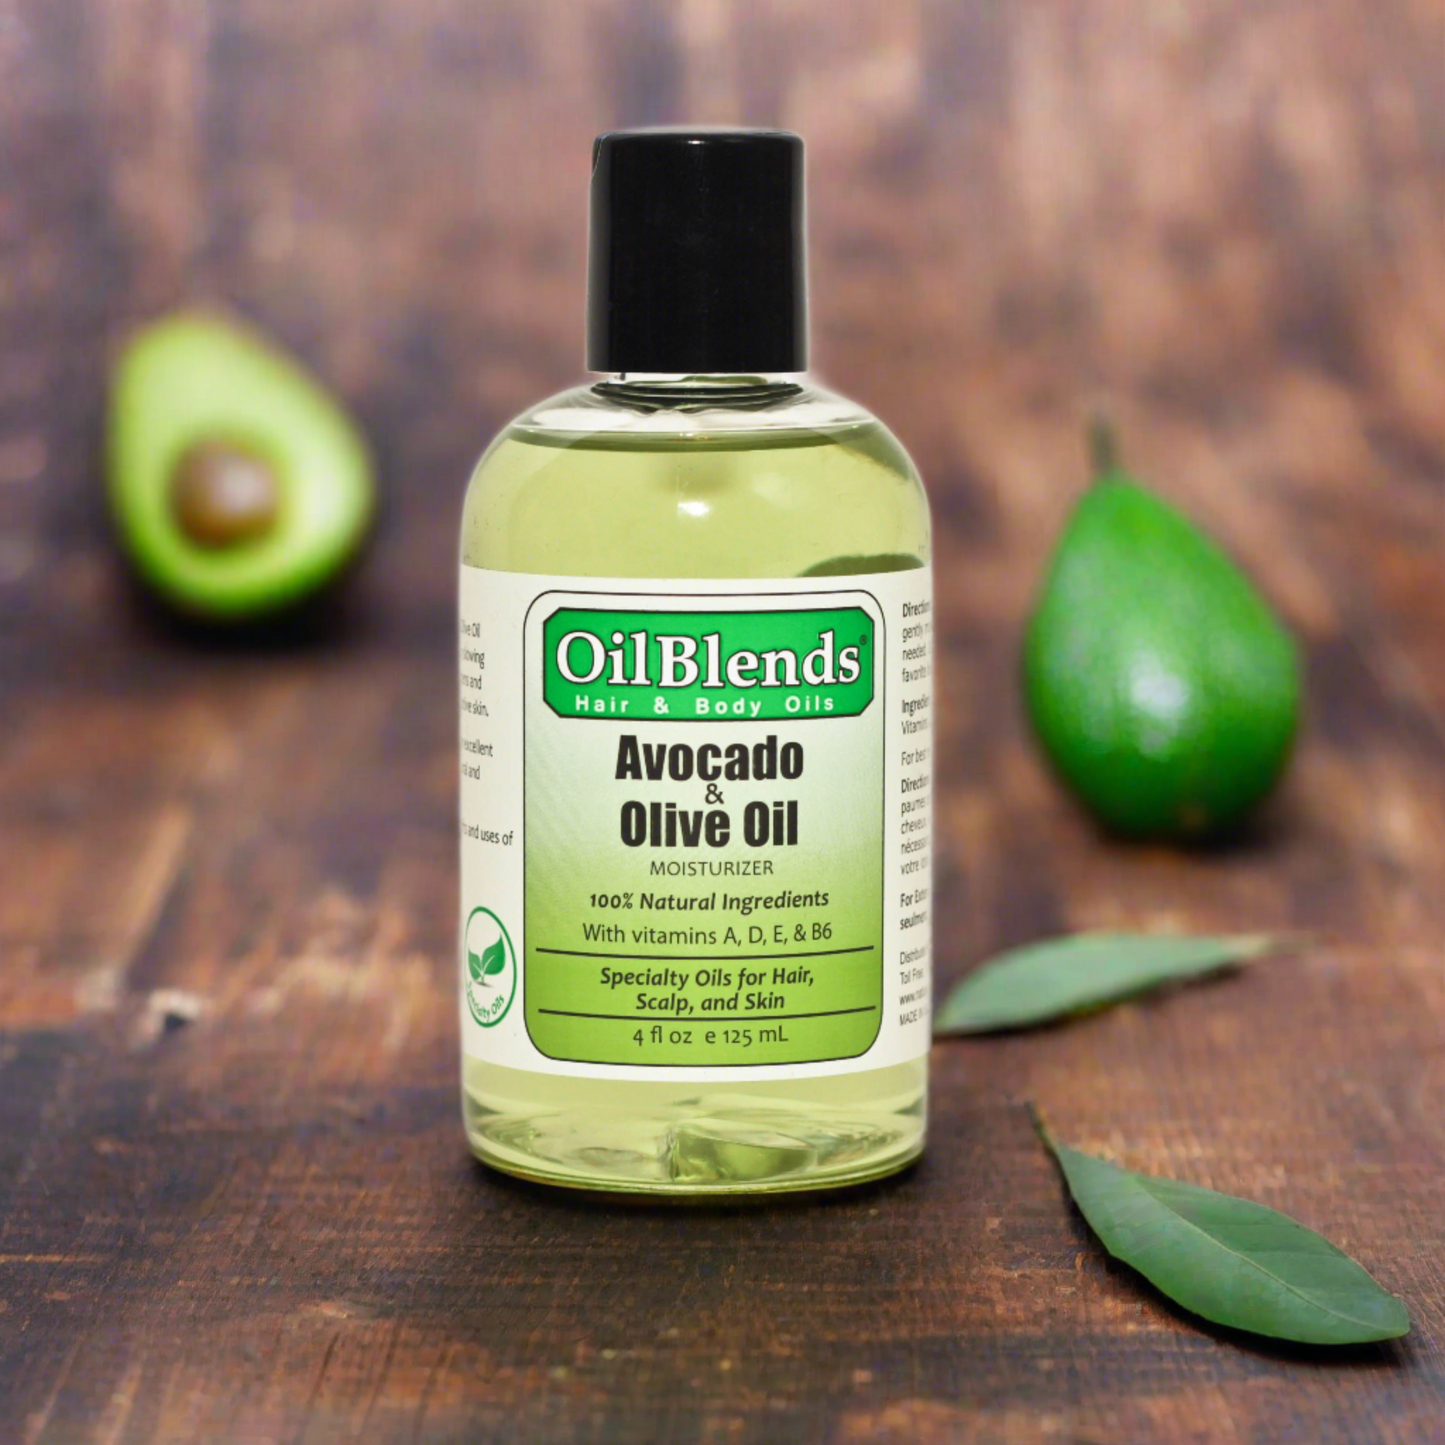 avocado and olive oil, oilblends, oil blends, body moisturizer, mature, sensitive or troubled skin, natural ingredients, hair oil.plant-based ingredients,organic,natural preoducts,for mature and sensitive skin,vegan friendly,cruelty free